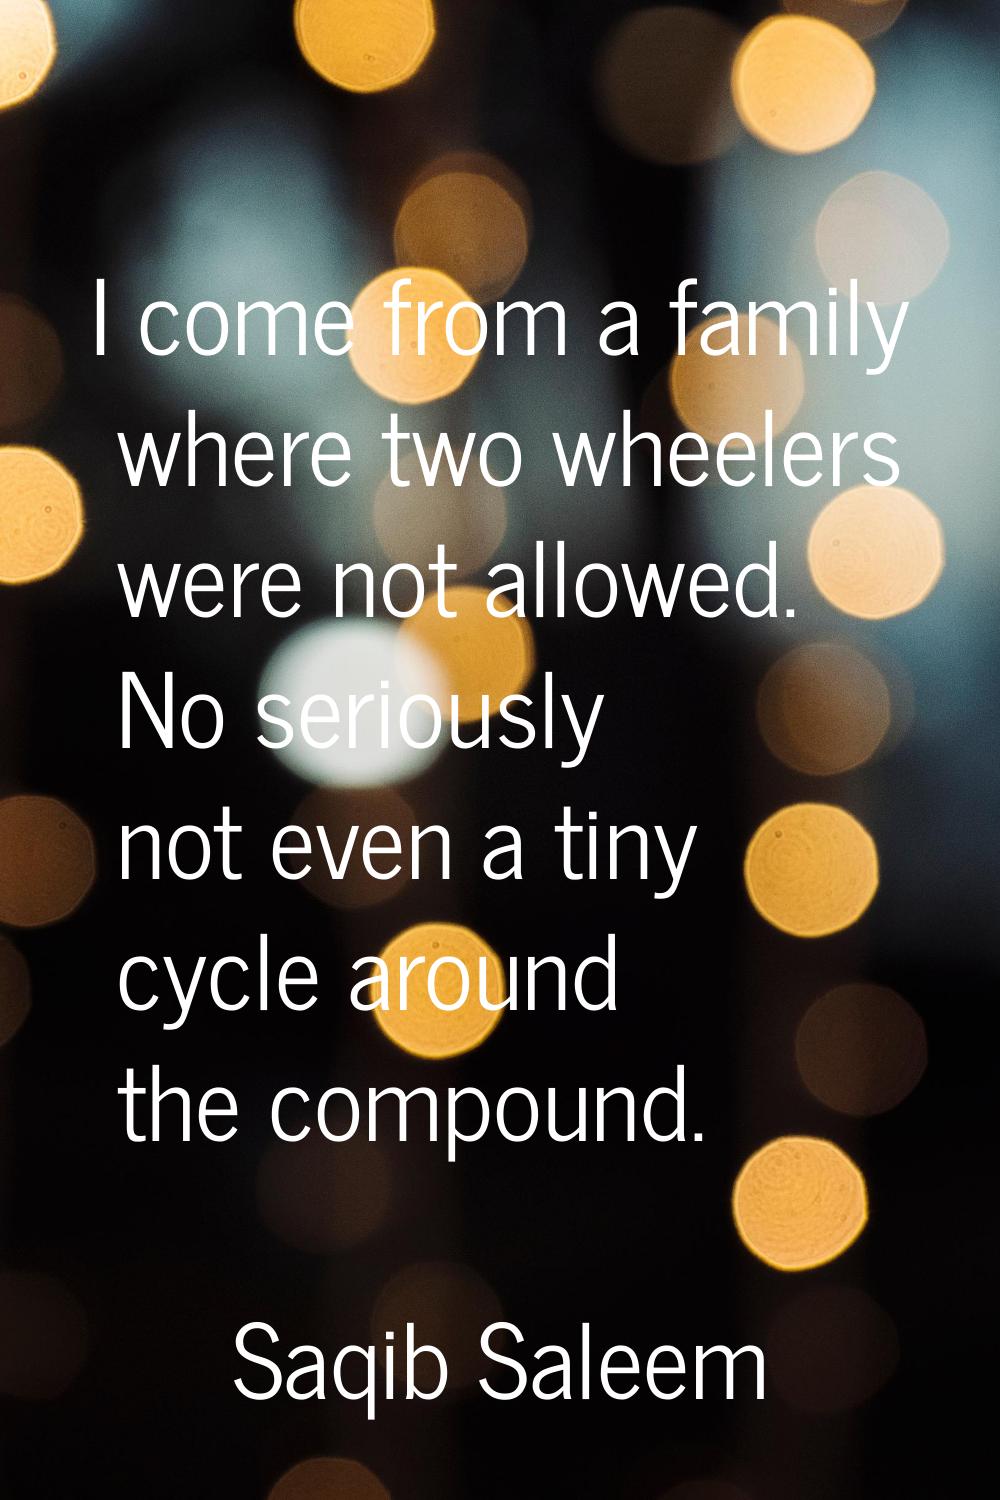 I come from a family where two wheelers were not allowed. No seriously not even a tiny cycle around